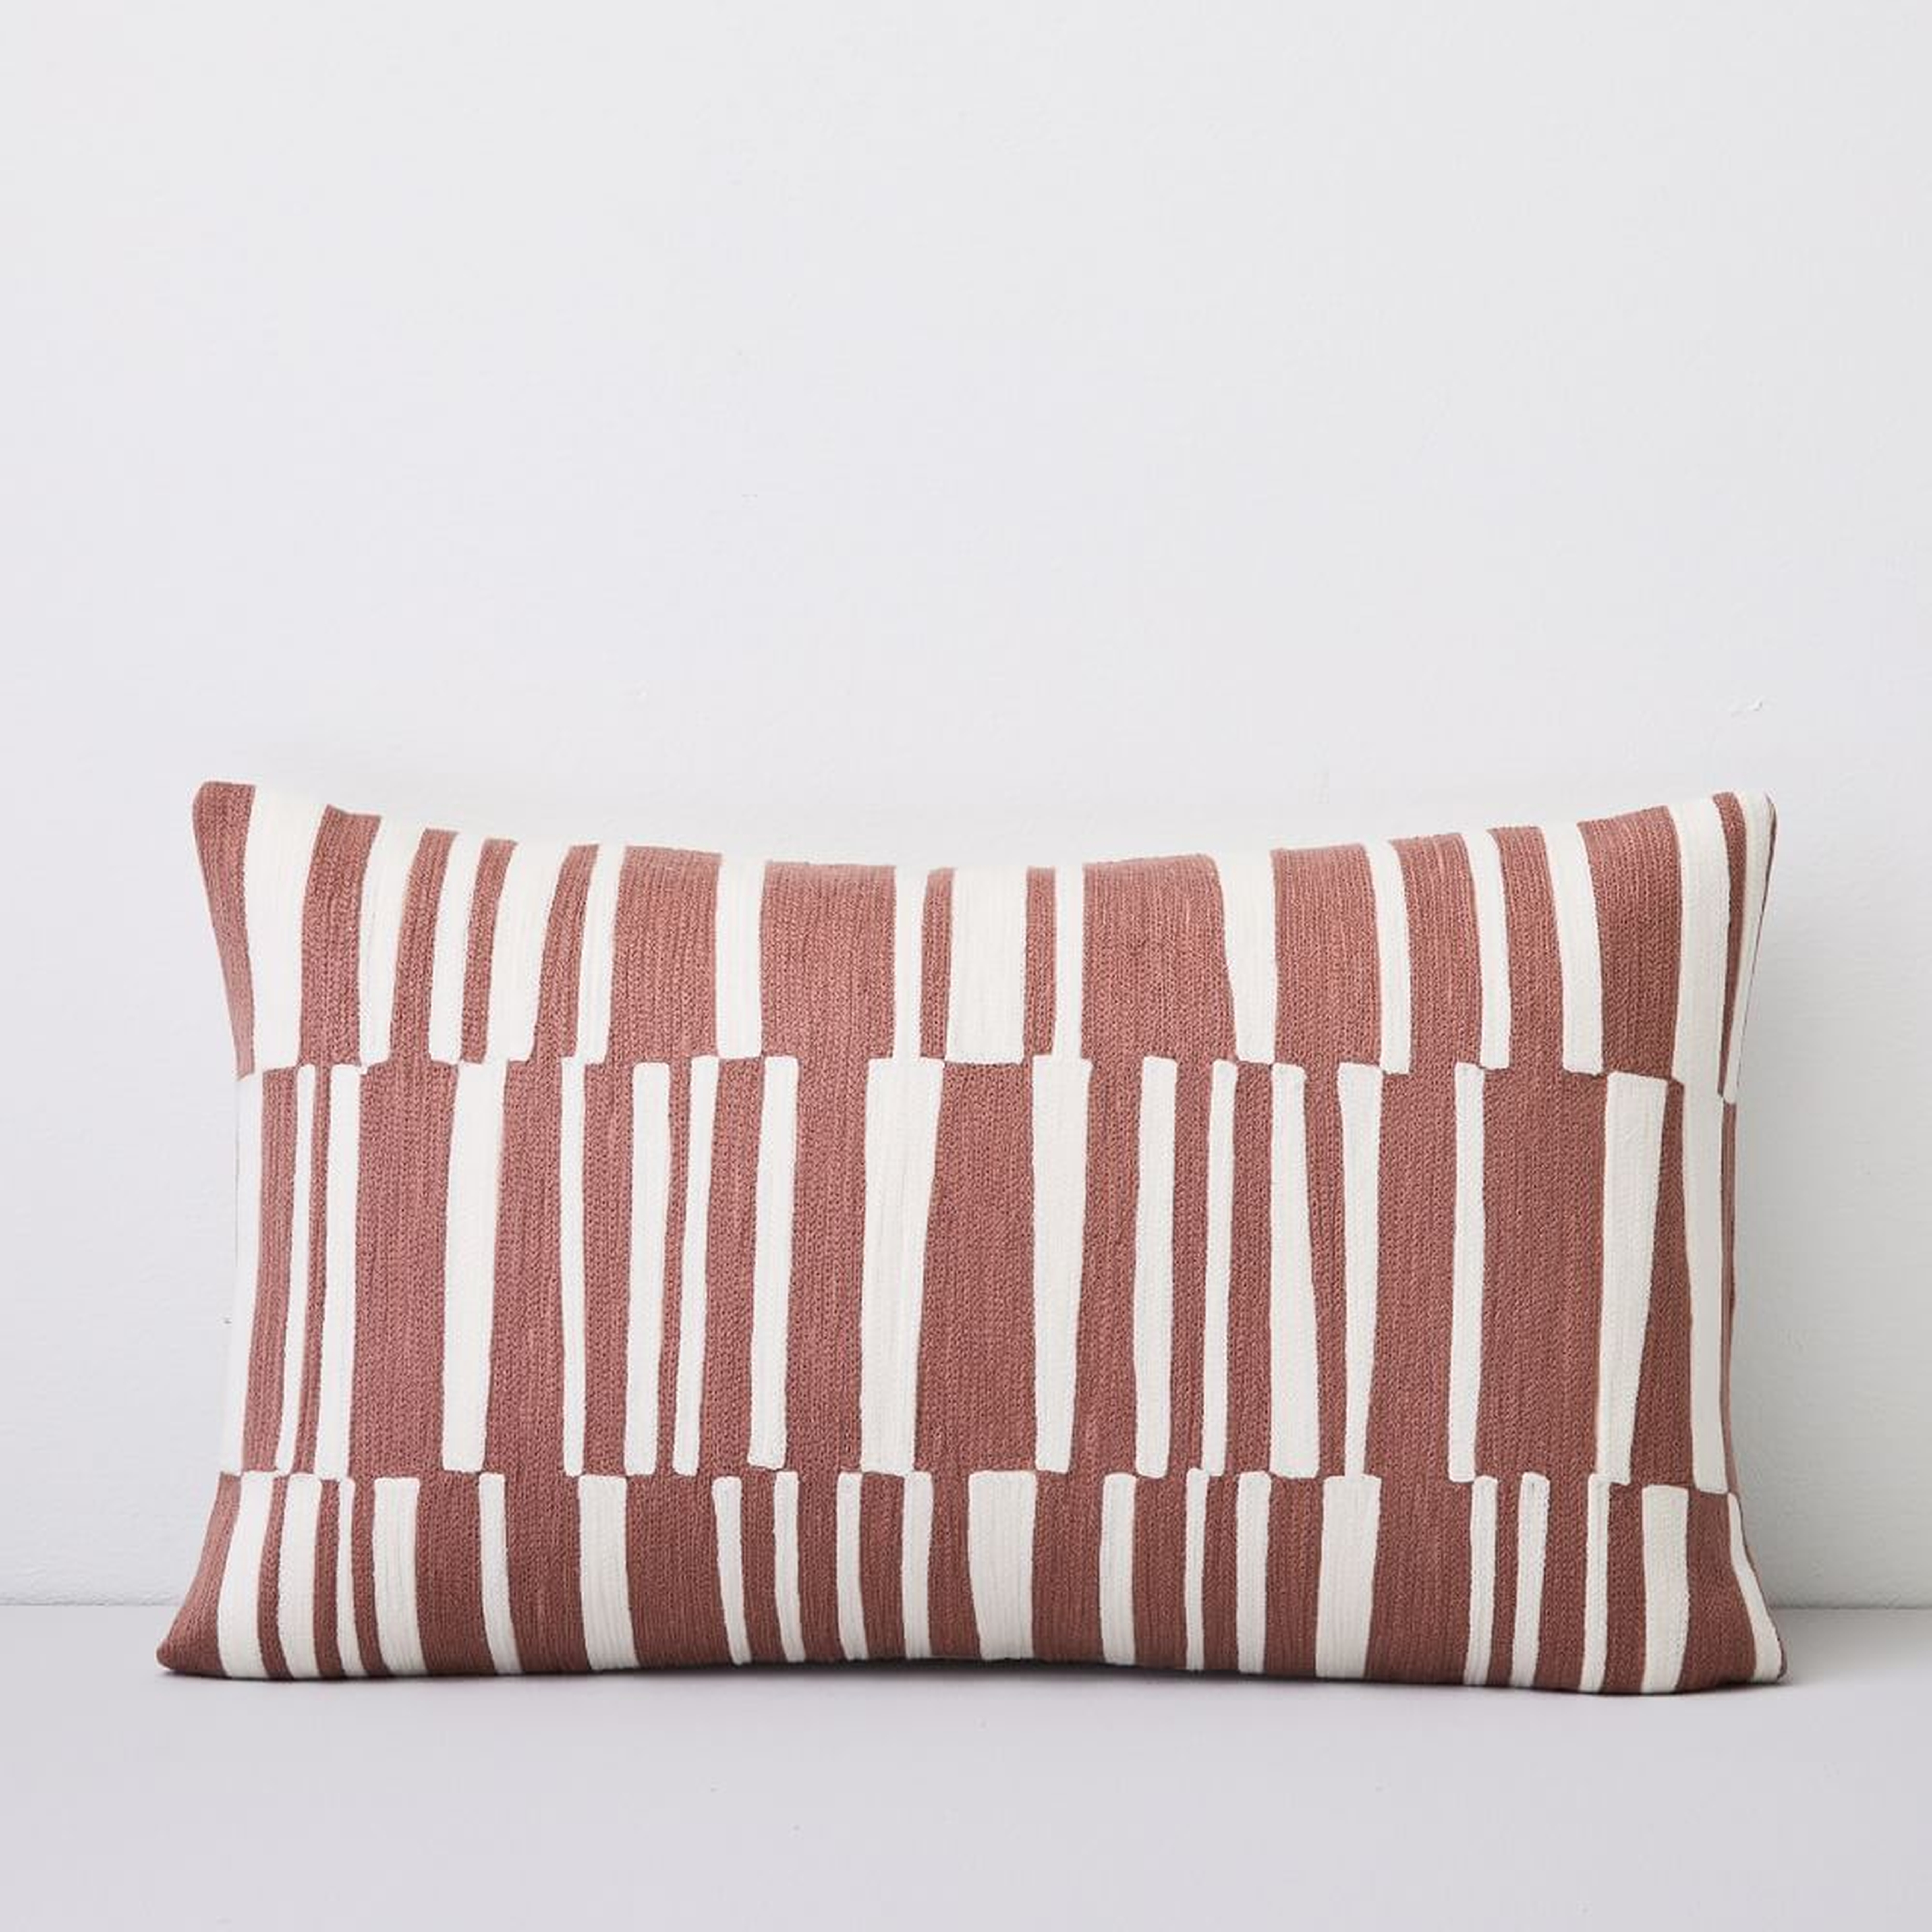 Crewel Linear Pillow Cover, Pink Stone, 12"x21" - West Elm